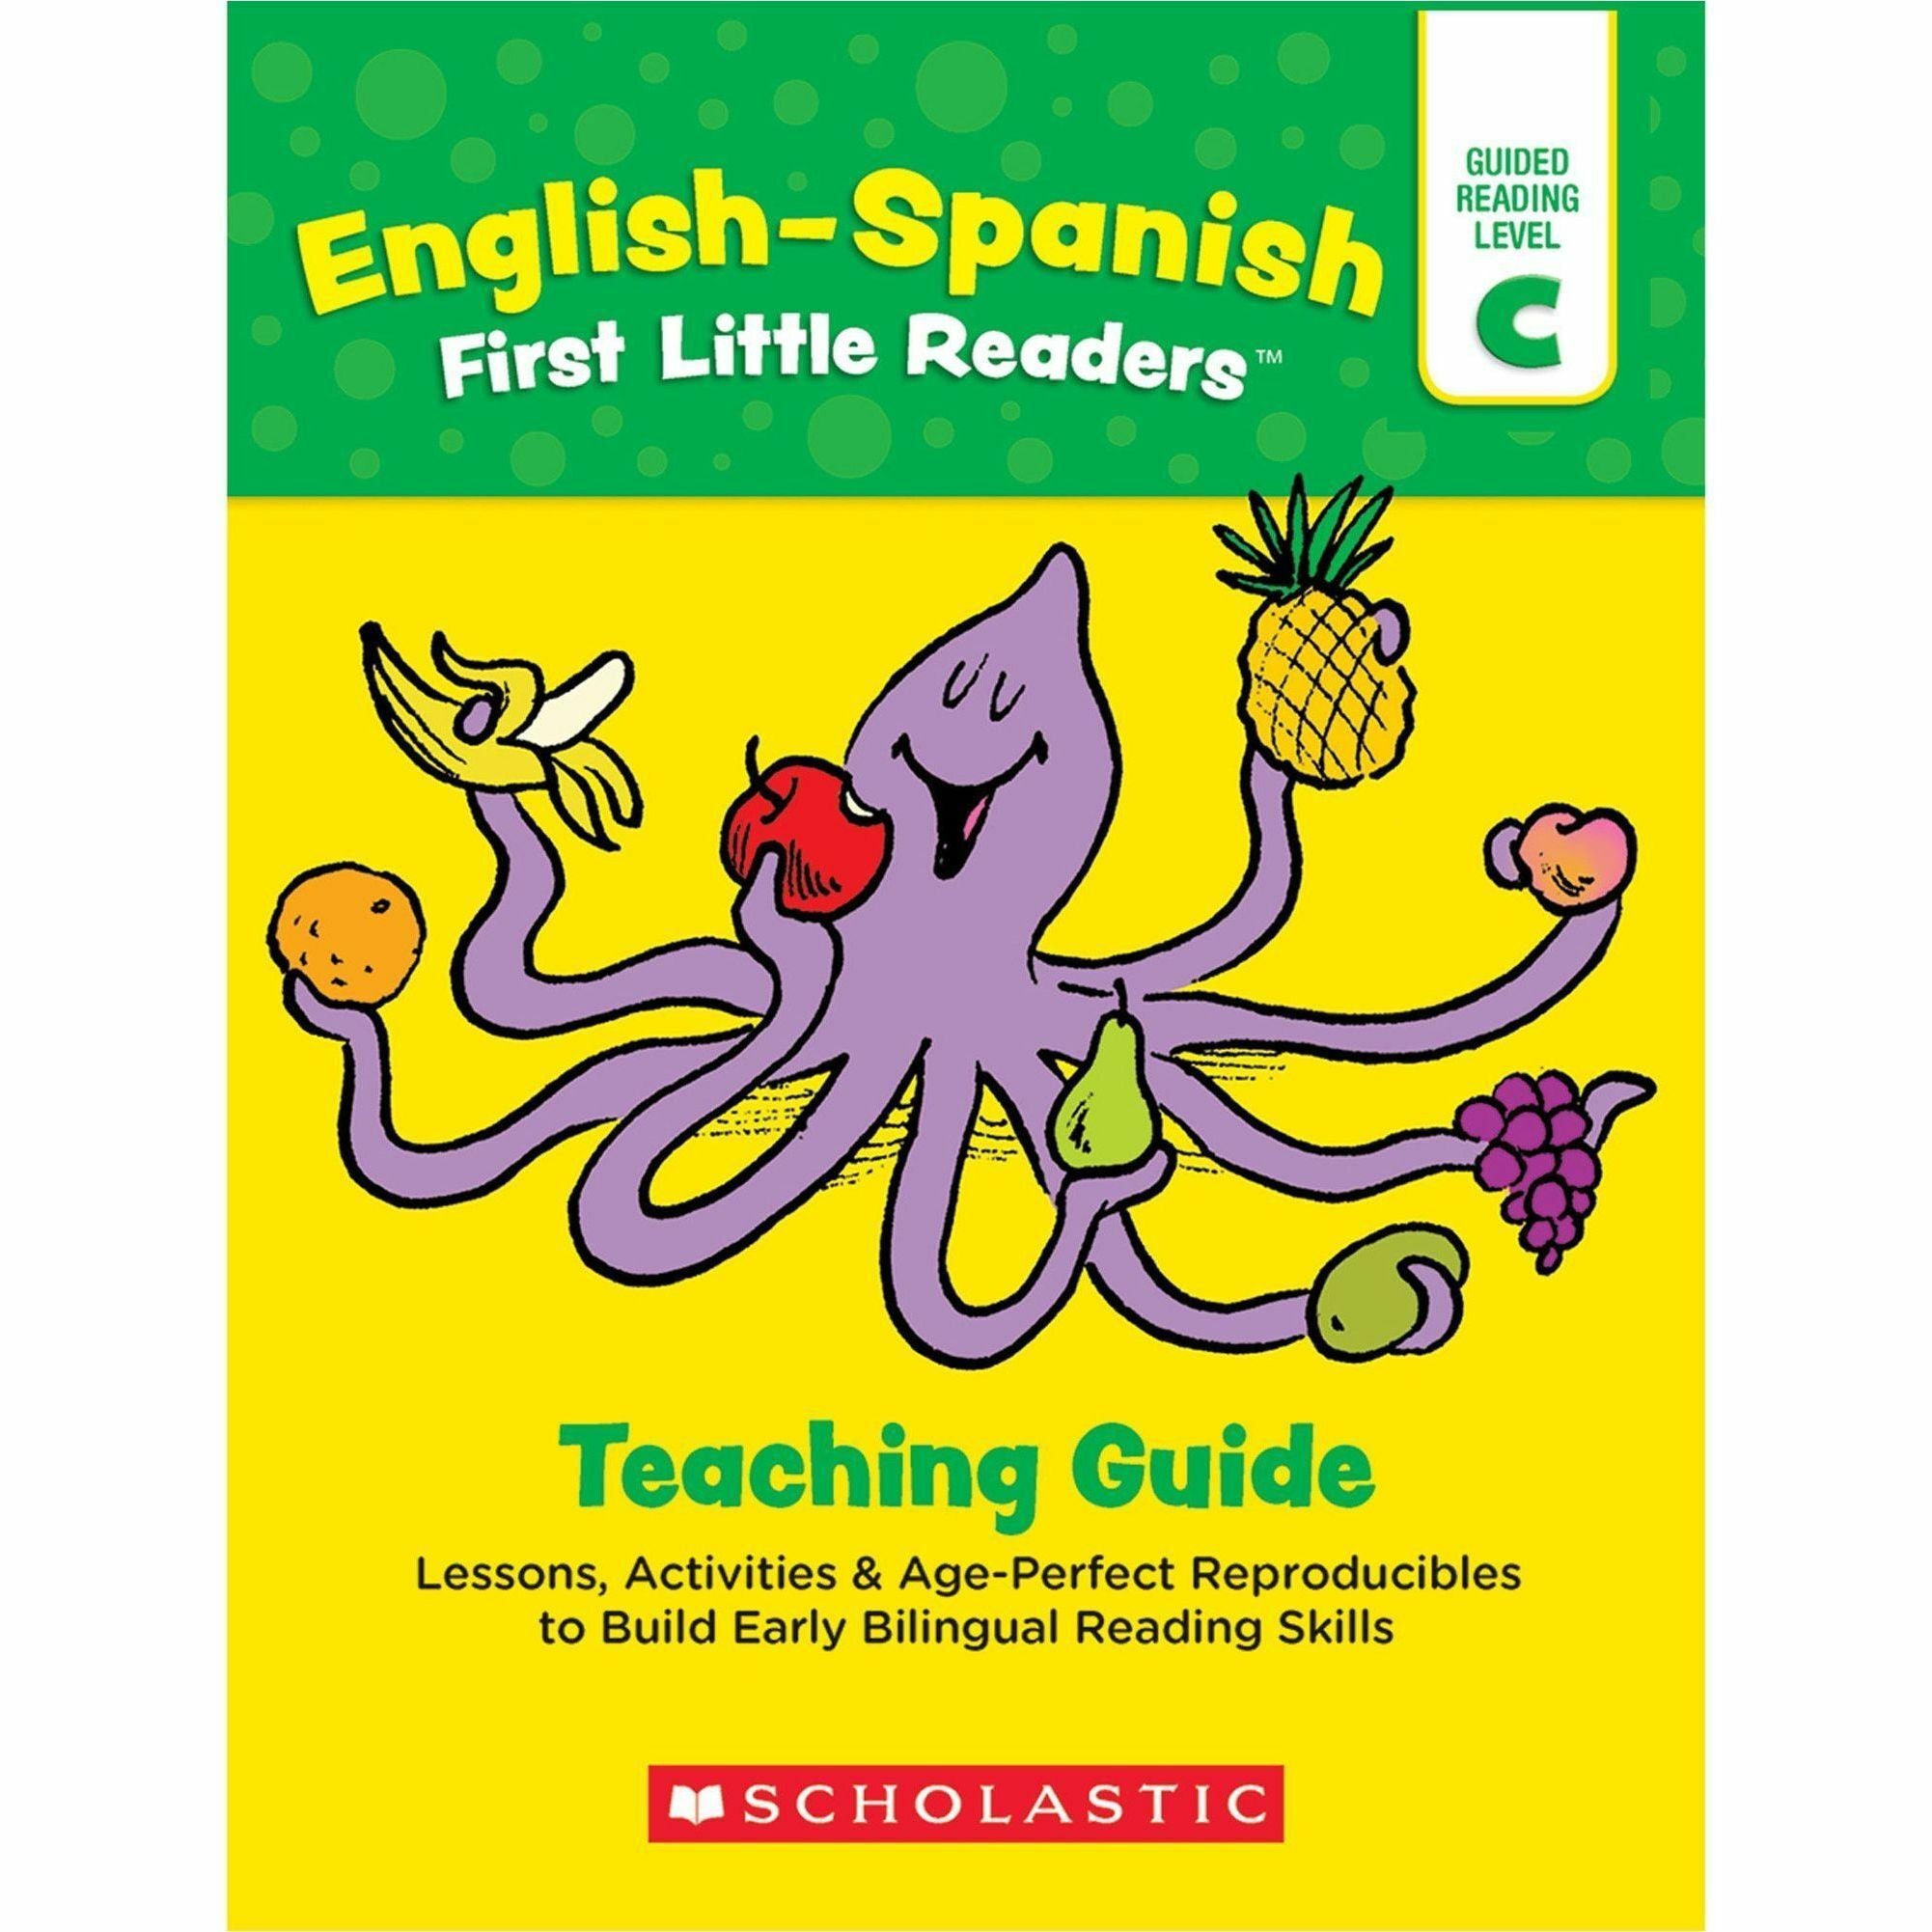 scholastic-first-little-readers-book-set-printed-book-by-liza-charlesworth-8-pages-scholastic-teaching-resources-publication-june-1-2020-book-grade-preschool-2-english-spanish_shs1338668056 - 2